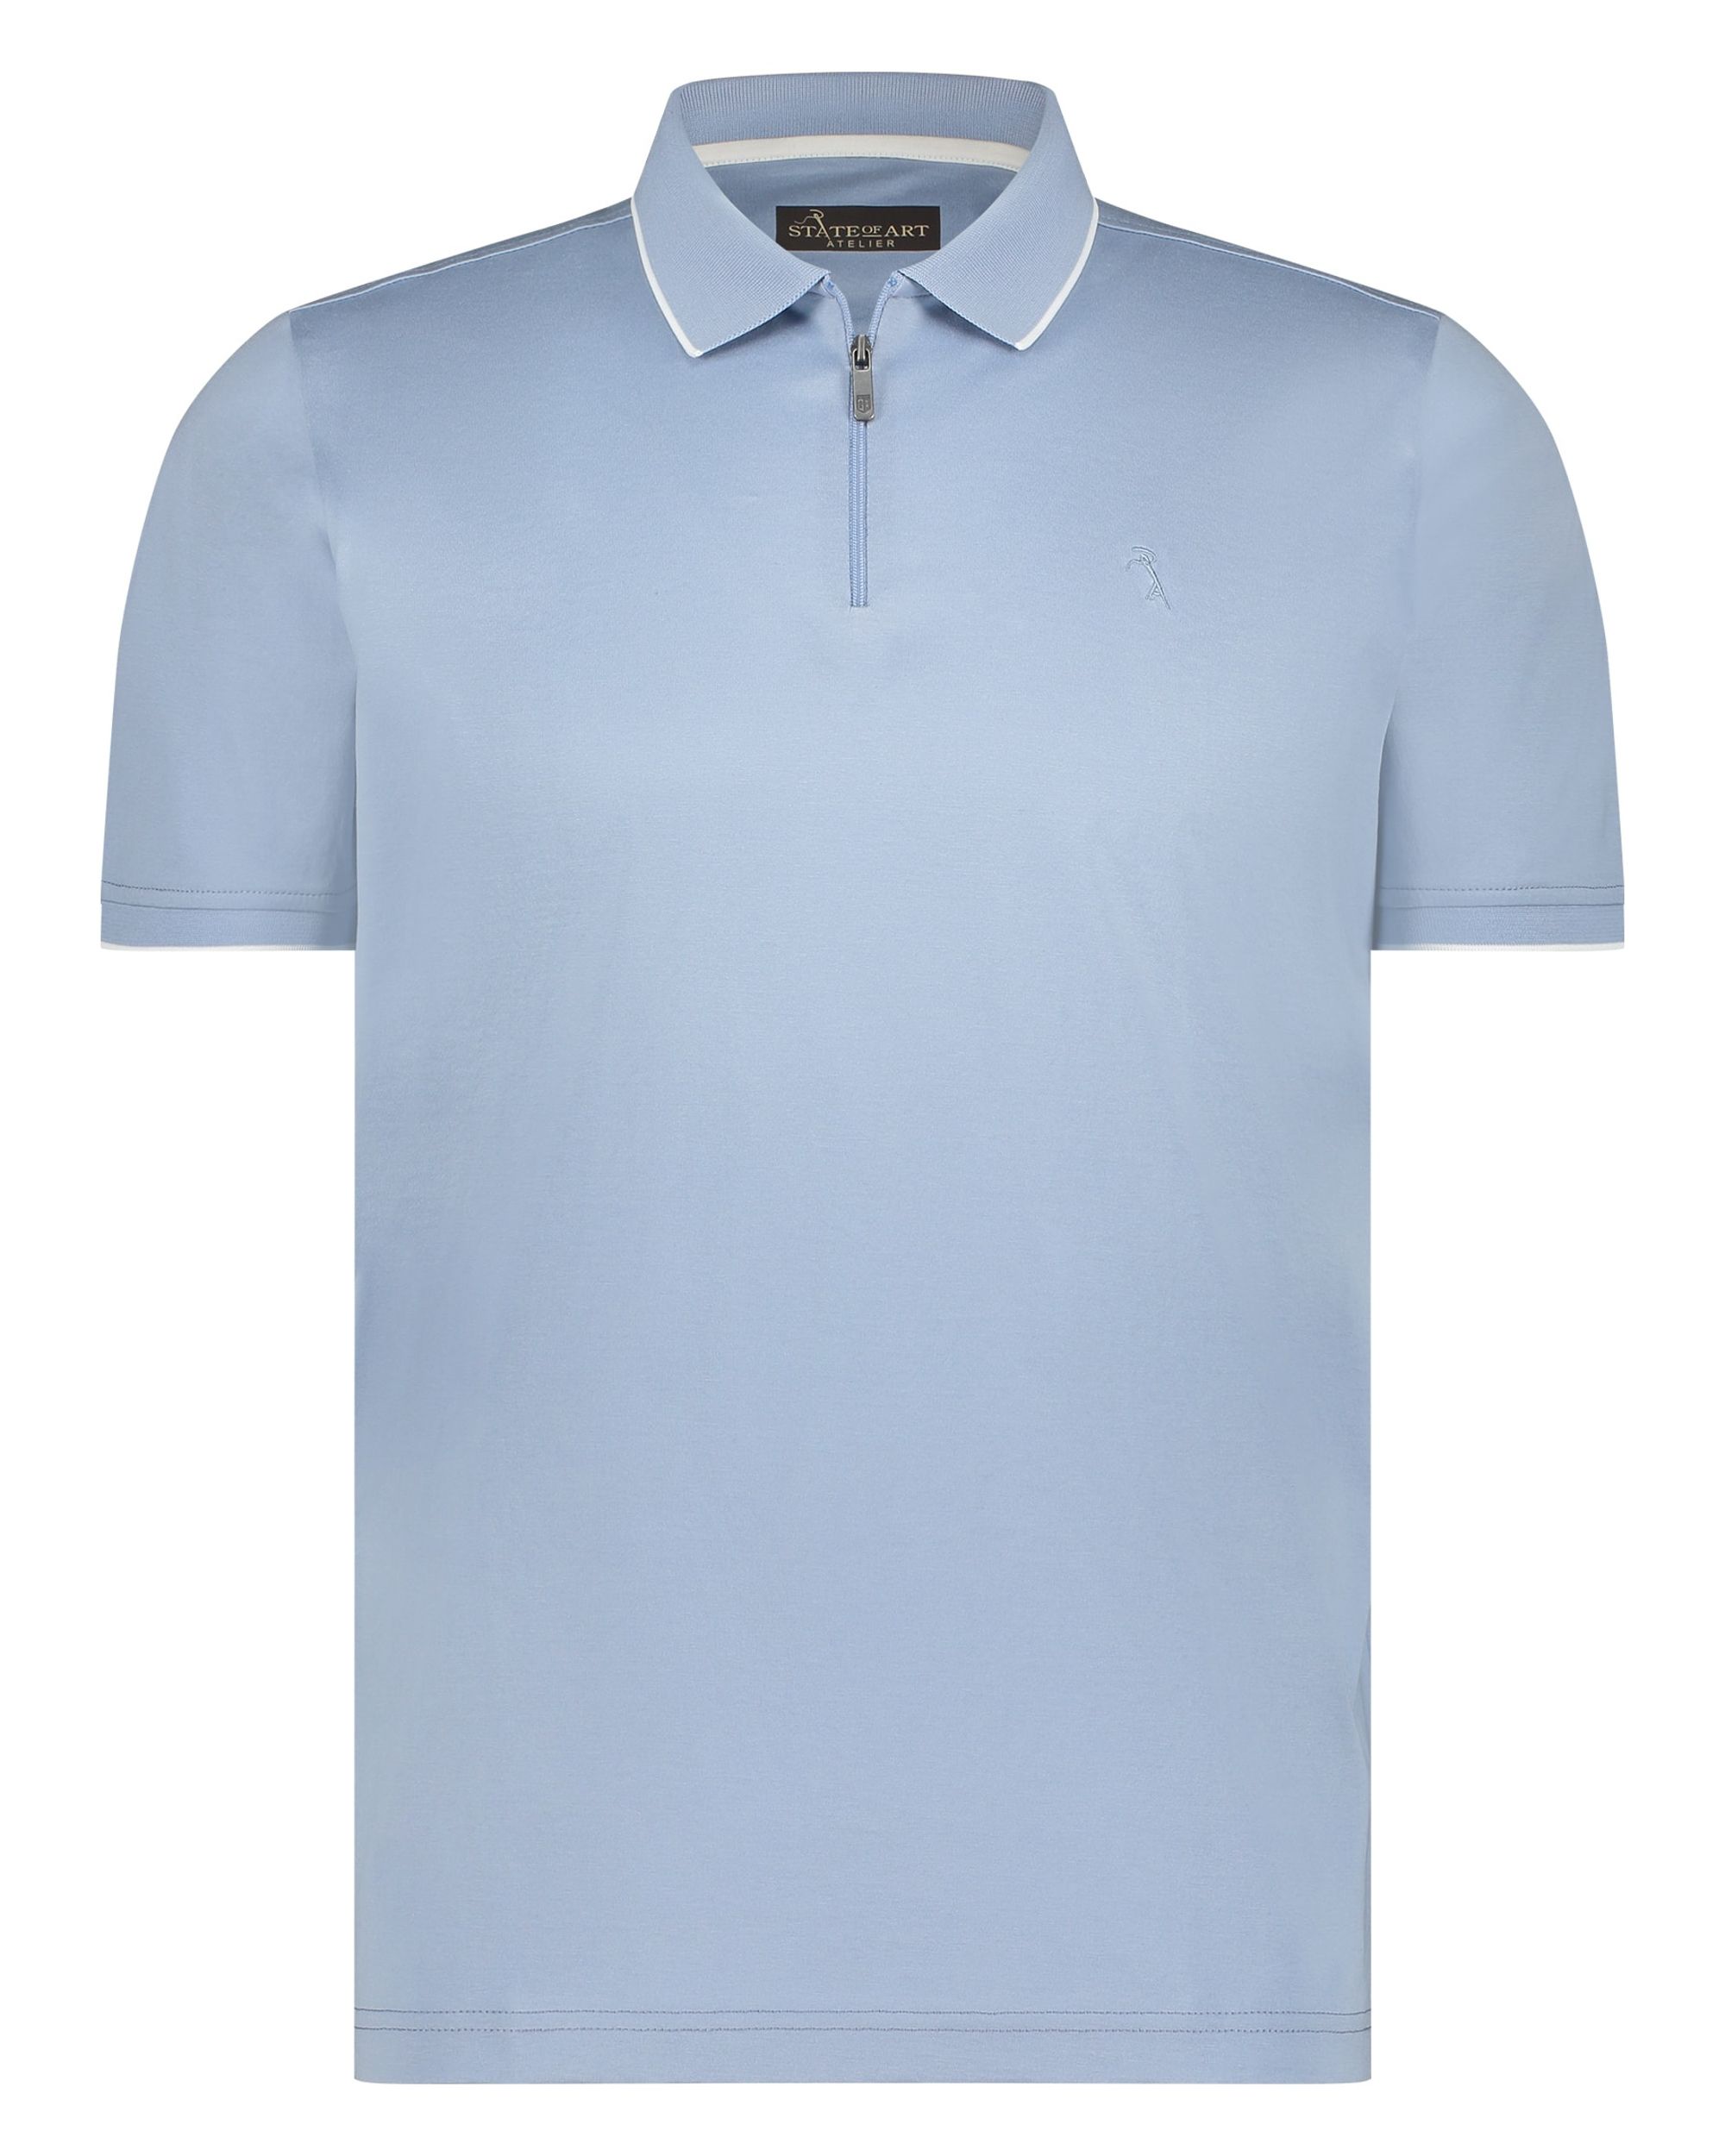 State of Art Polo KM Donker blauw 095082-001-4XL